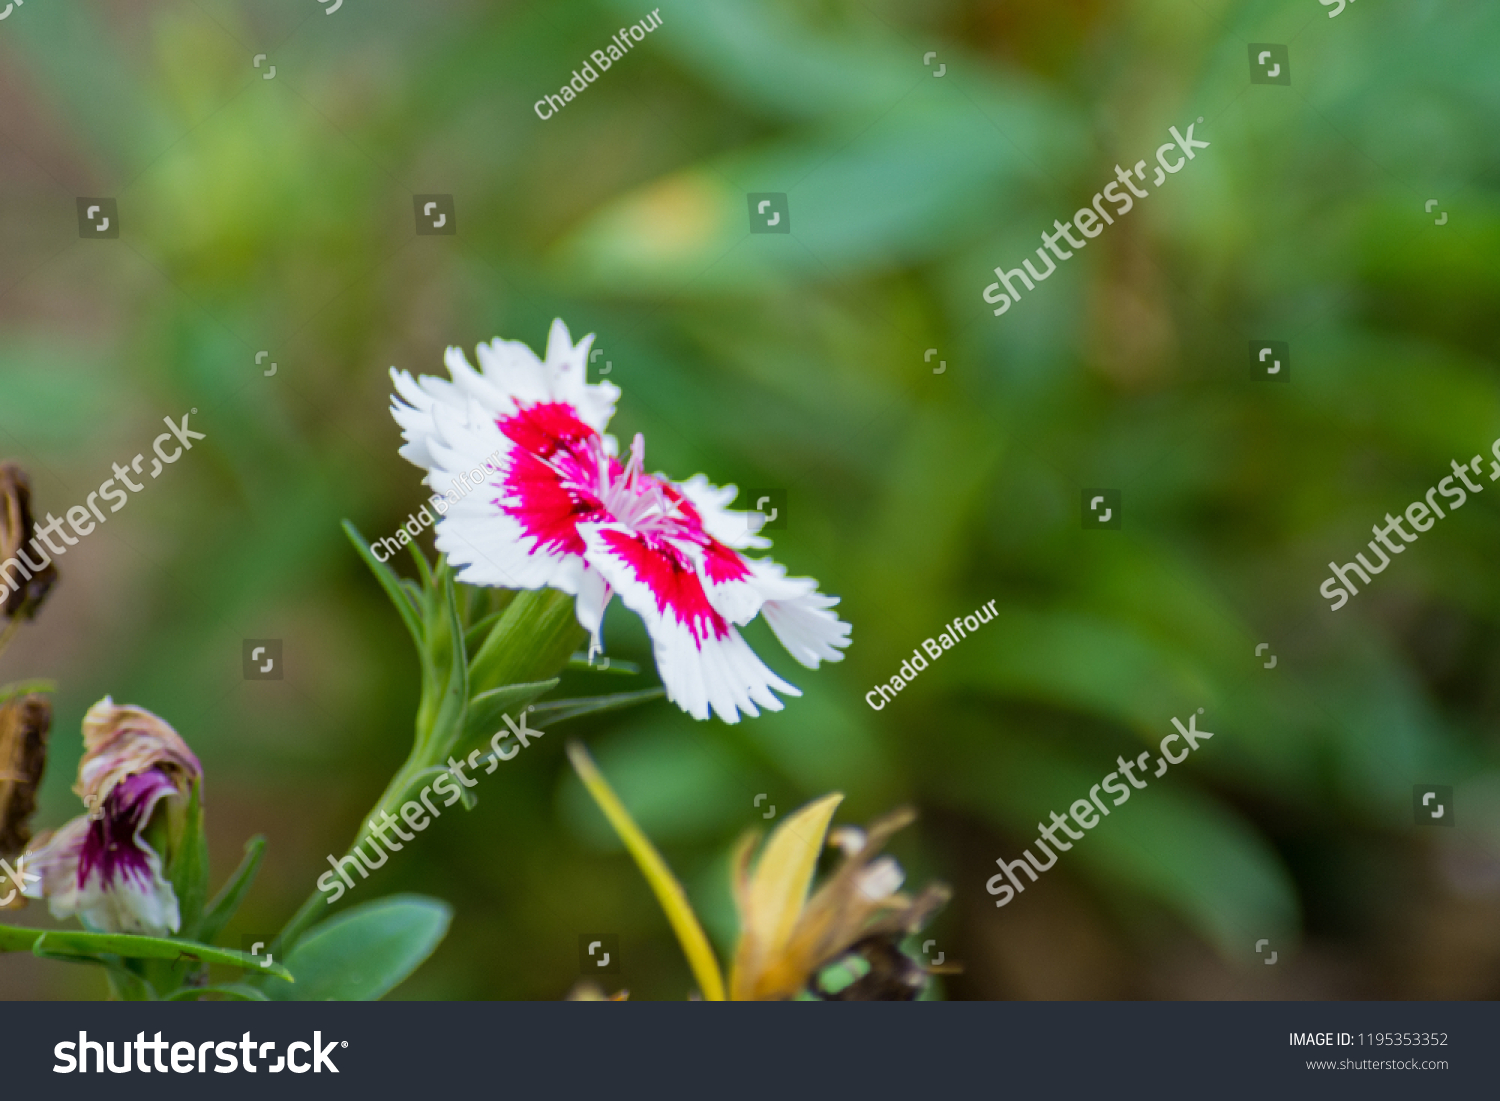 Close up of a flower blooming in the grass next to withering flowers #1195353352